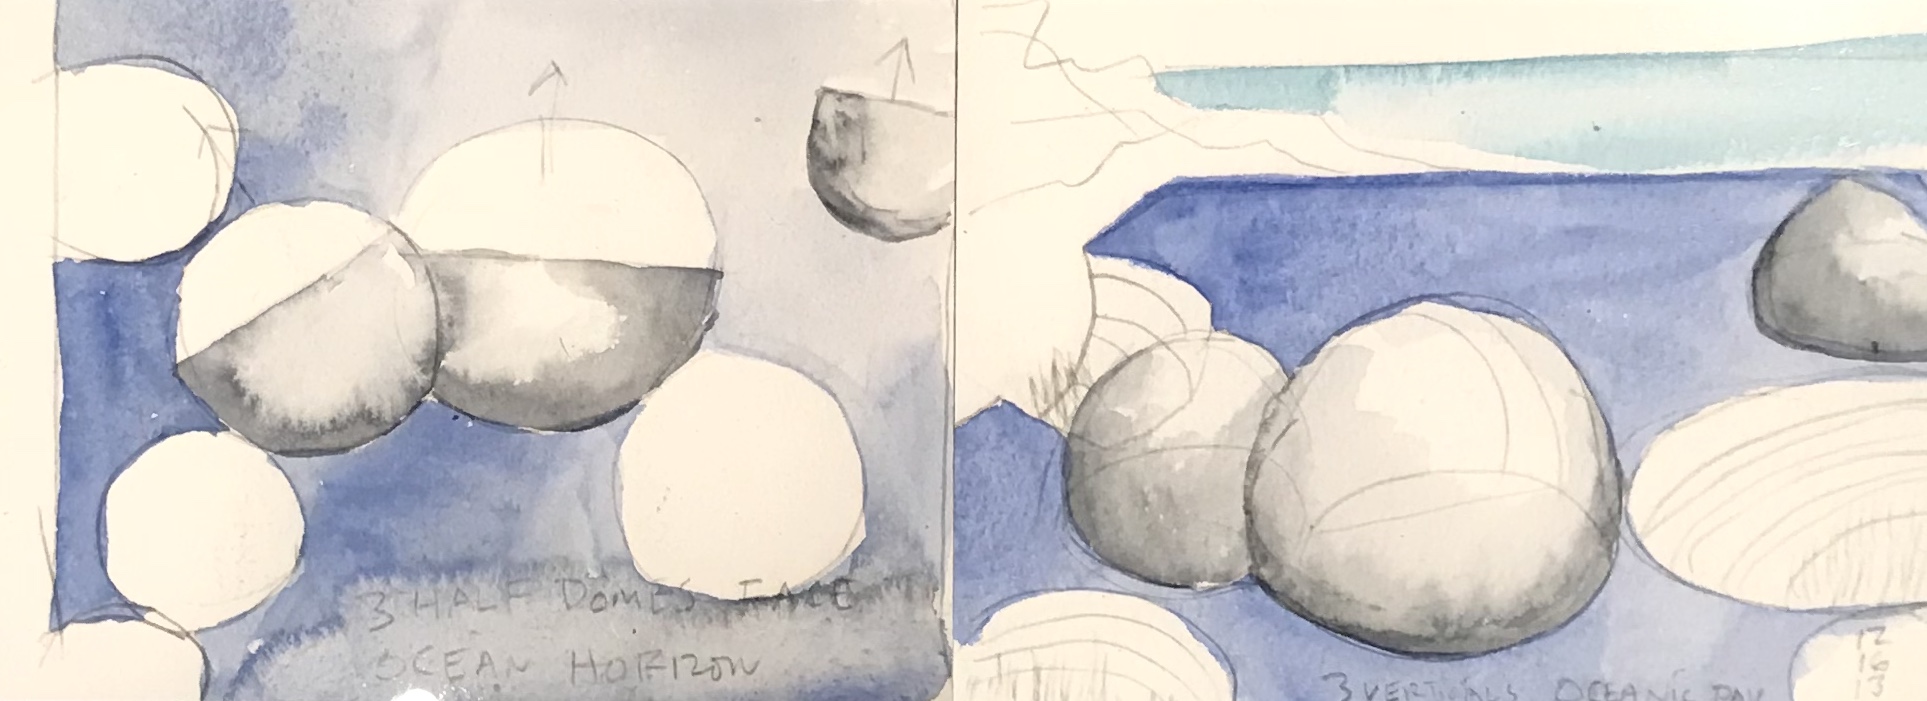 “Subtractions & Additions” Ex of IN: Exhibition Table 4. Watercolor and pencil on paper, 5” x 14”